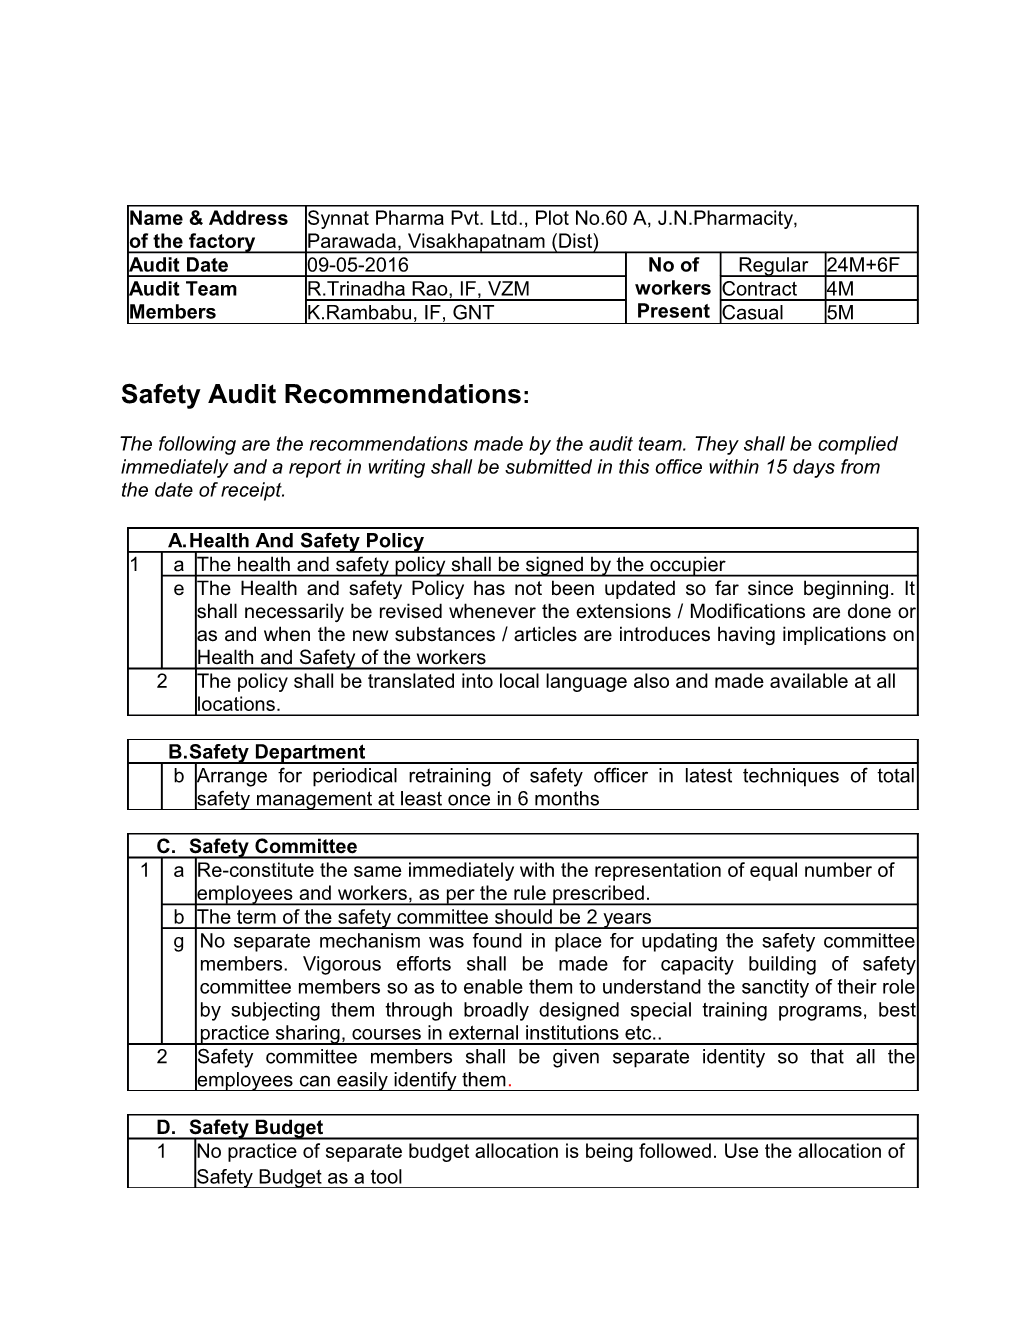 Safety Audit Recommendations